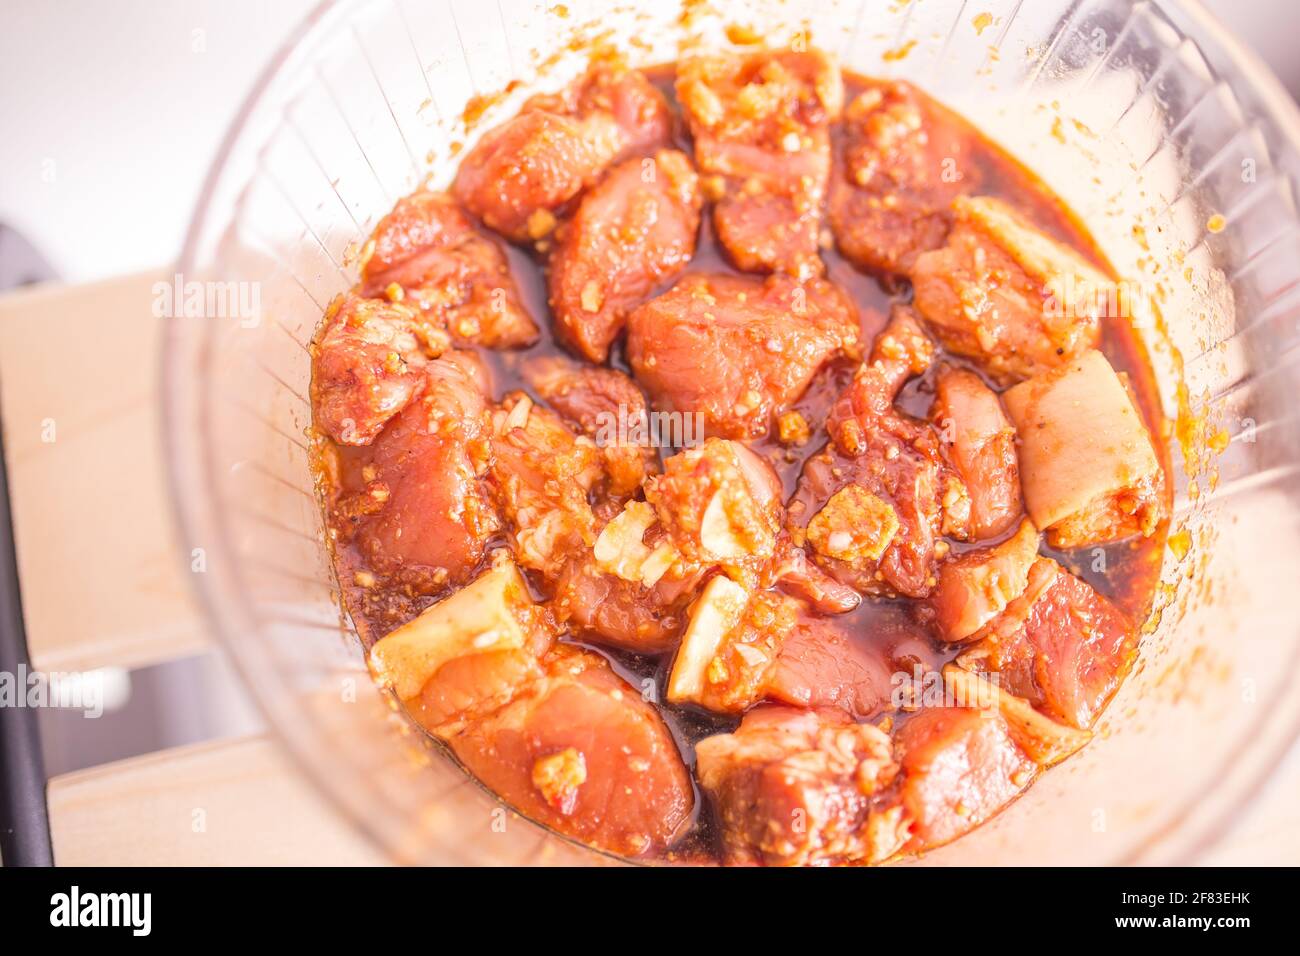 Pork marinated with caramel and spices in a glass bowl Stock Photo